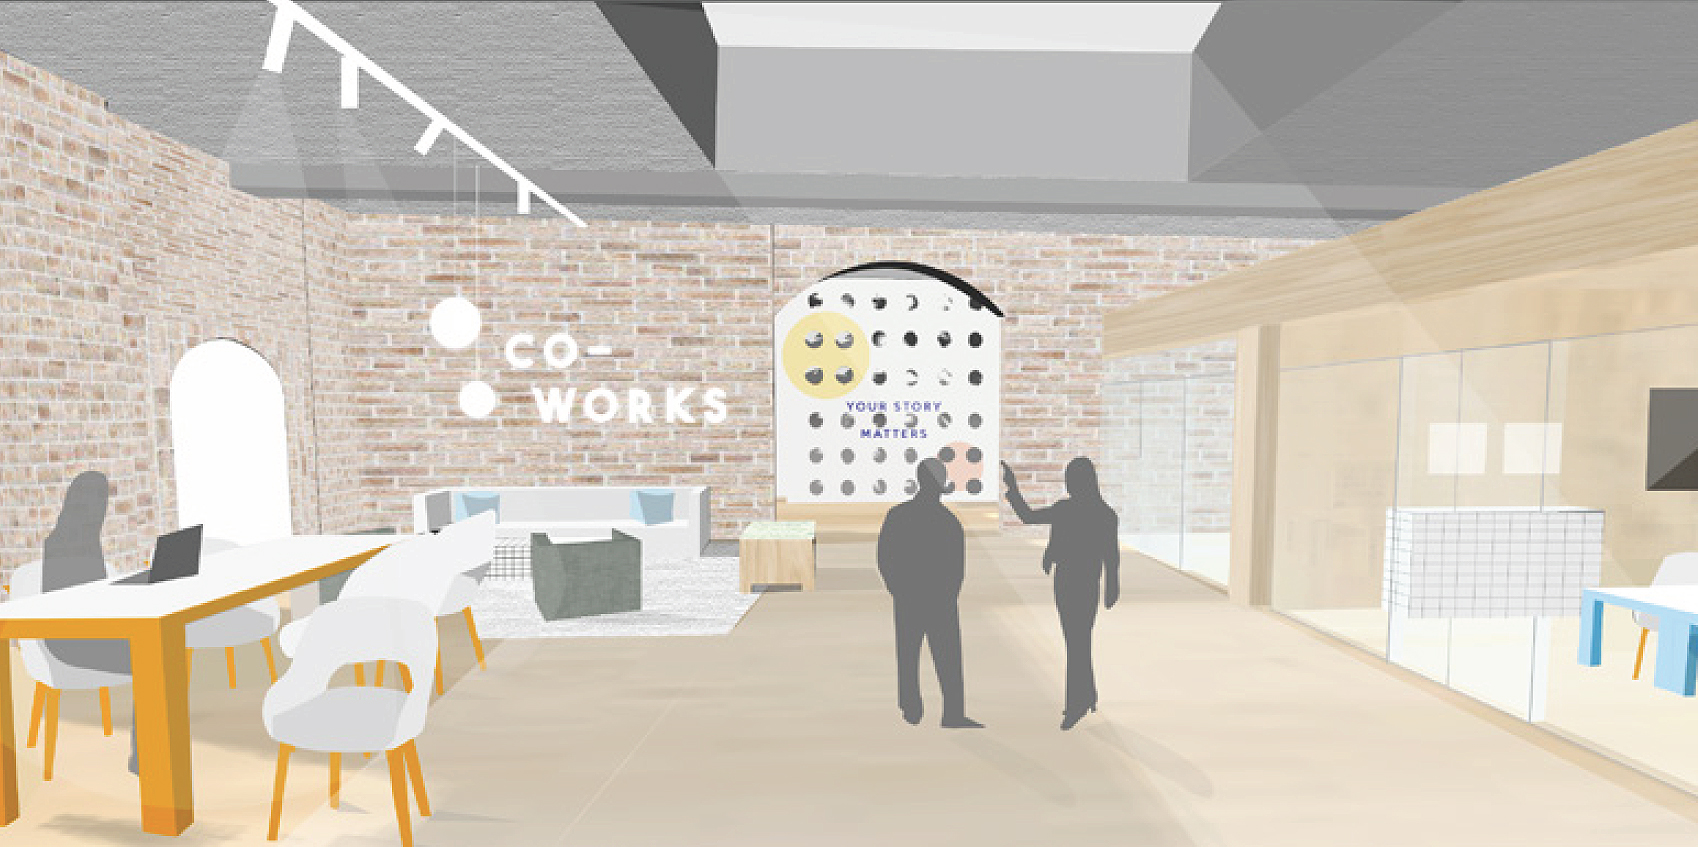 student rendering shows interior with shared workspace and private offices